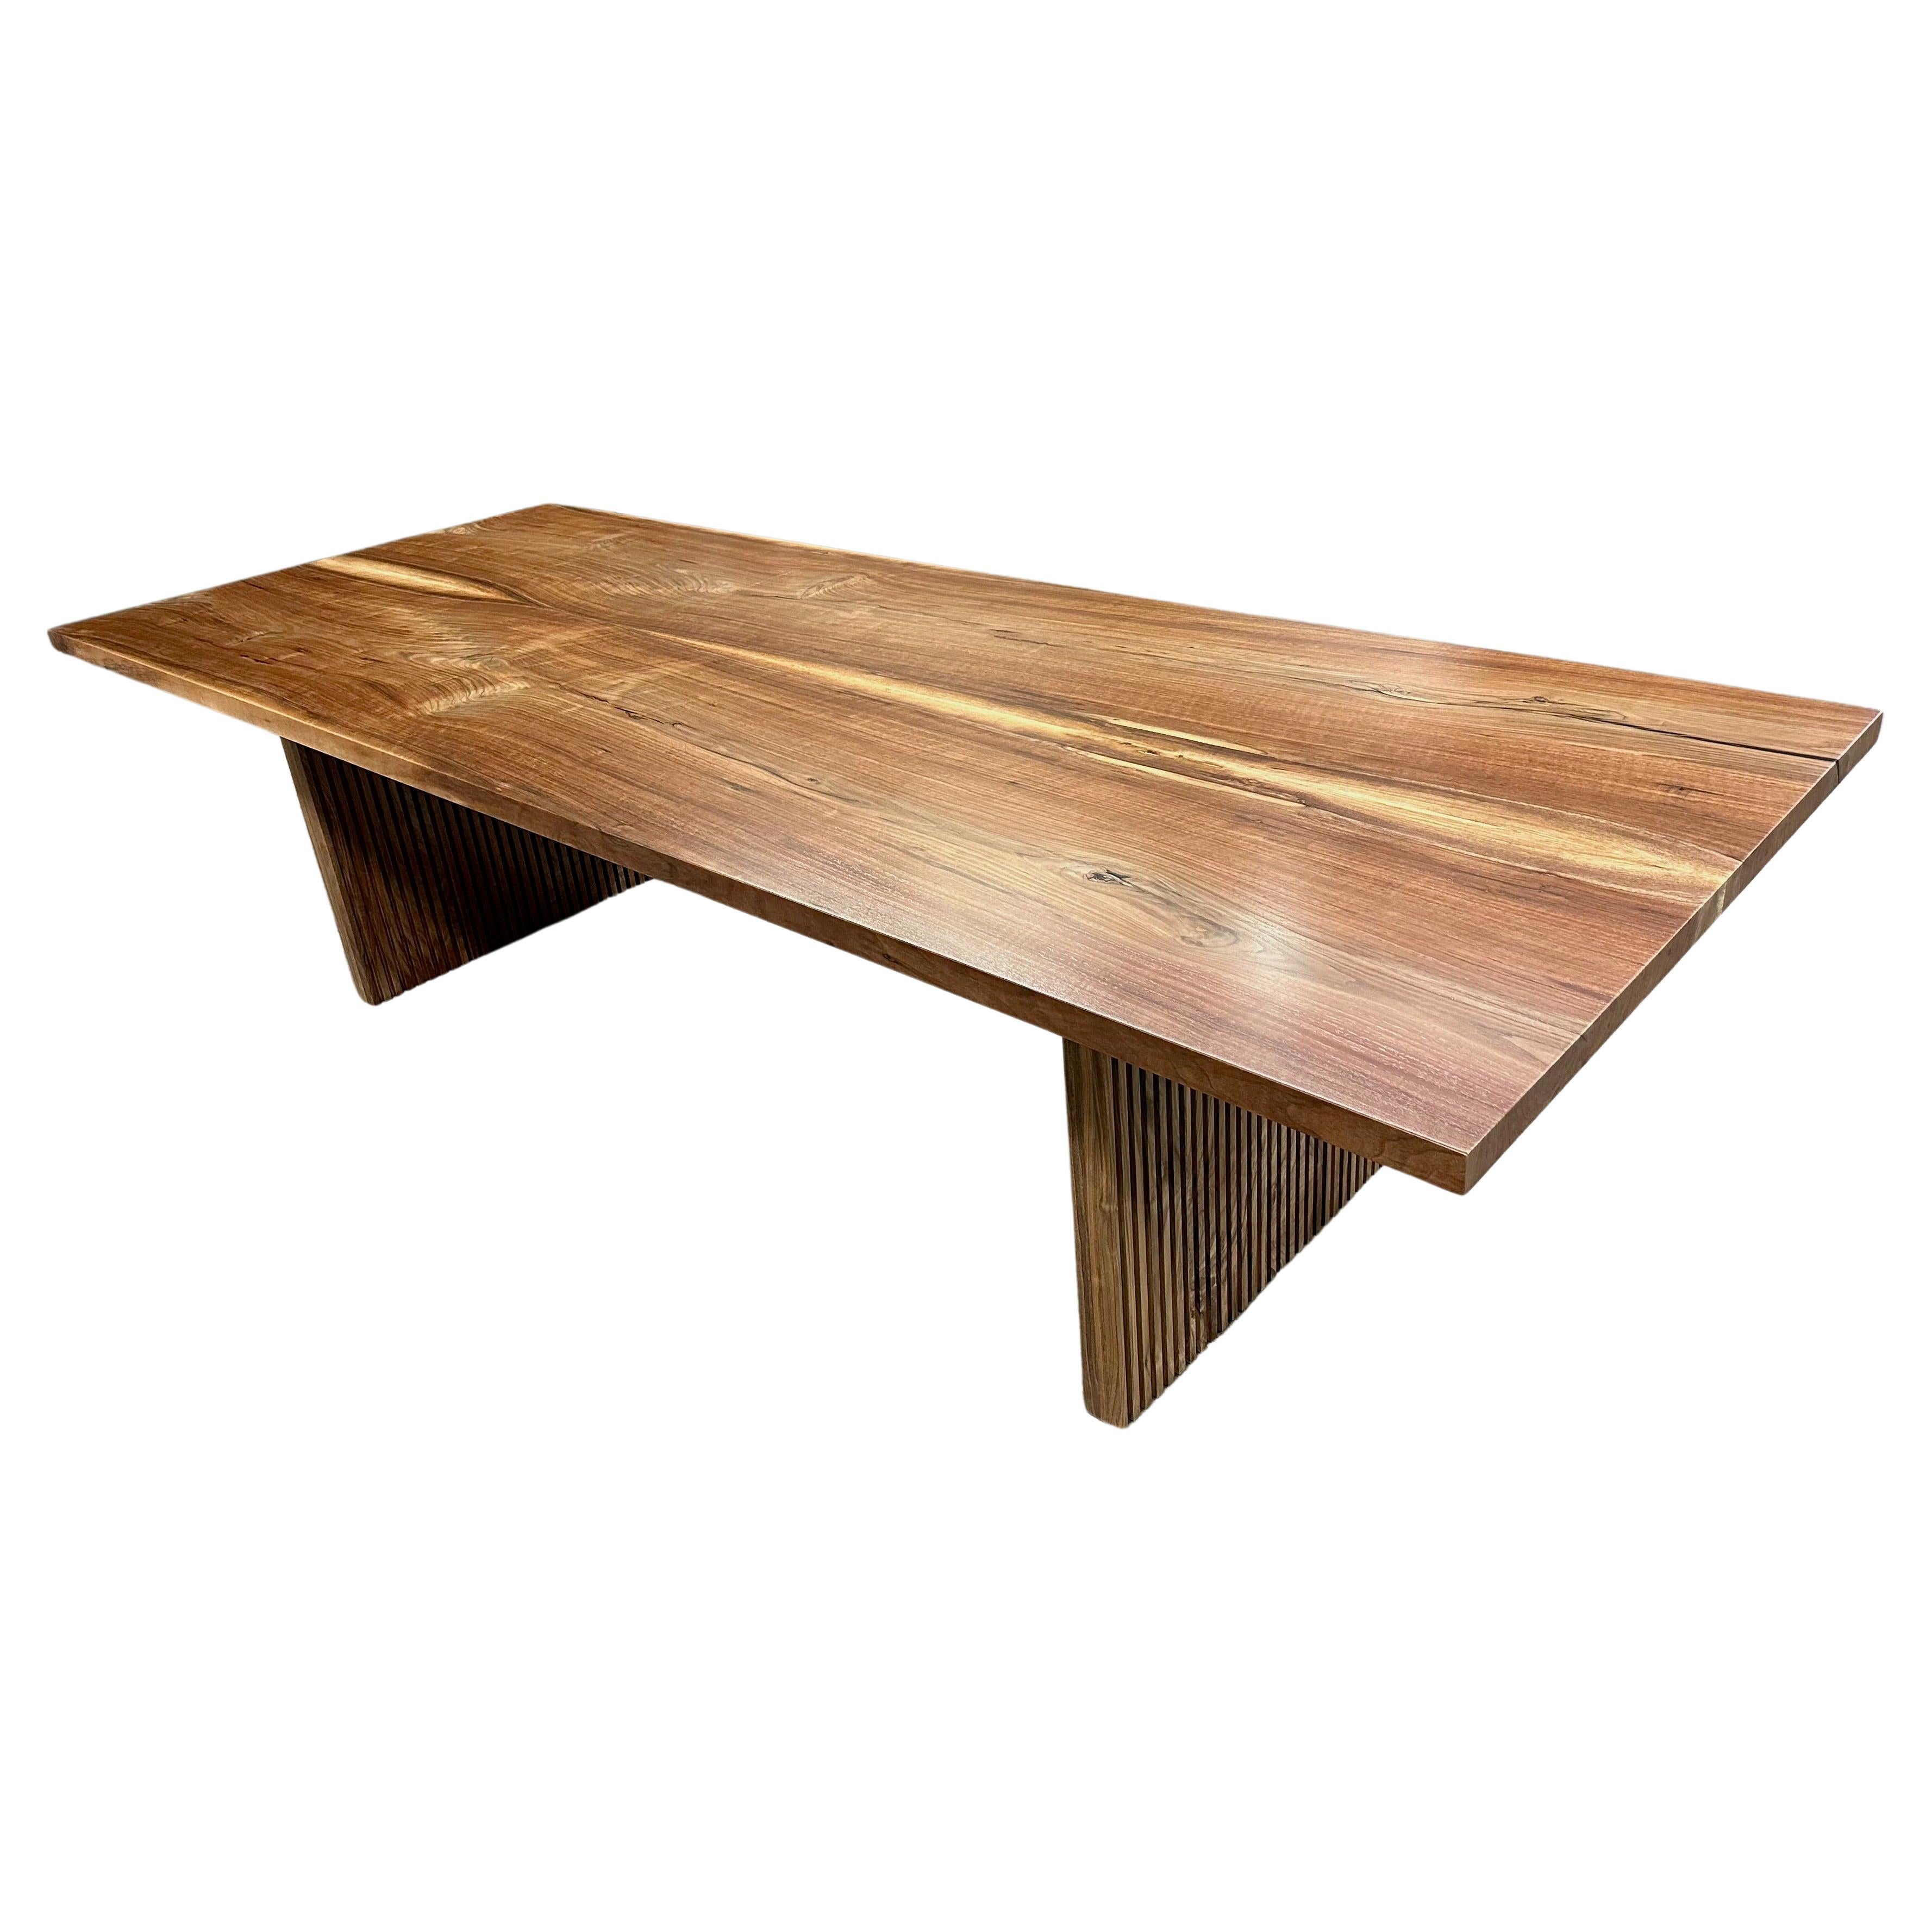 Bookmatched walnut top dining table with fluted walnut legs